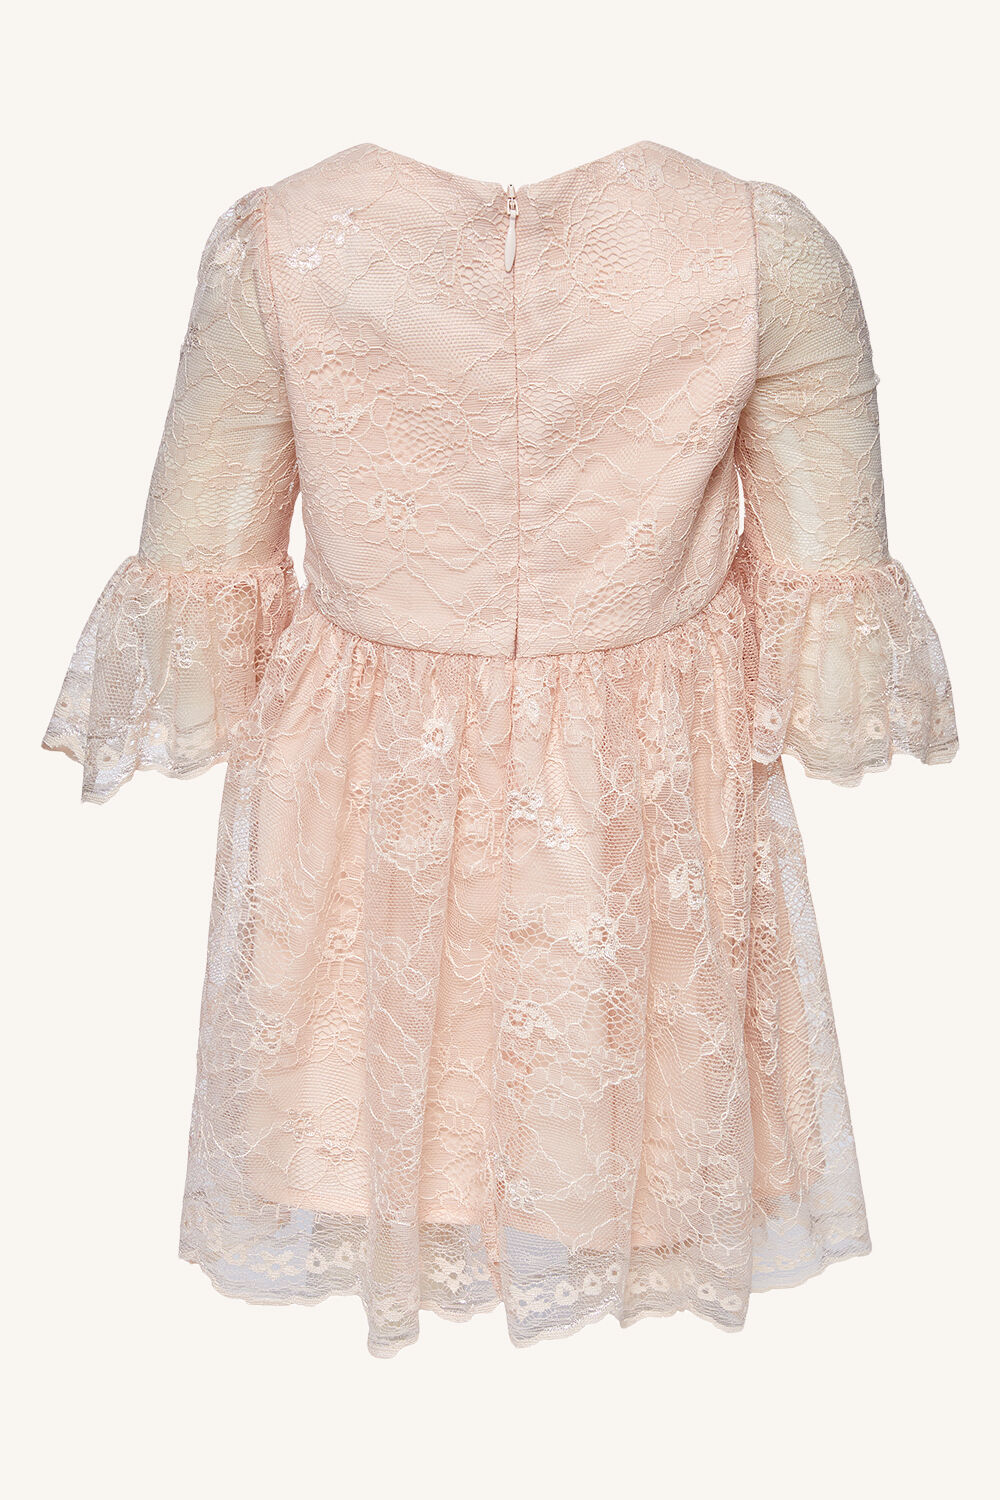 BABY GIRL LIANNI LACE DRESS in colour SOFT PINK